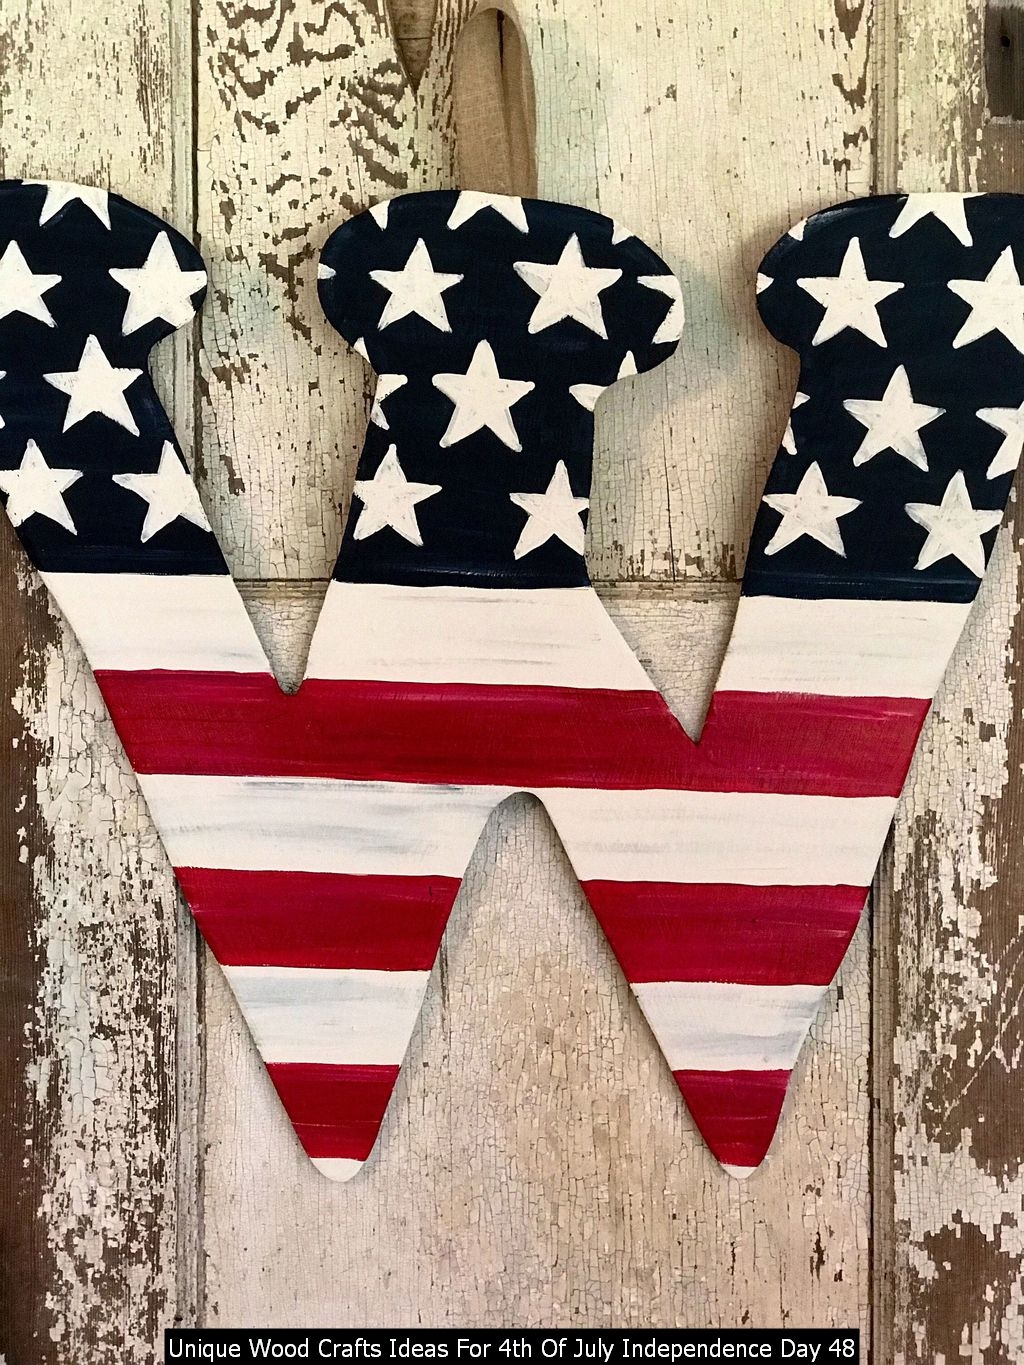 Unique Wood Crafts Ideas For 4th Of July Independence Day 48